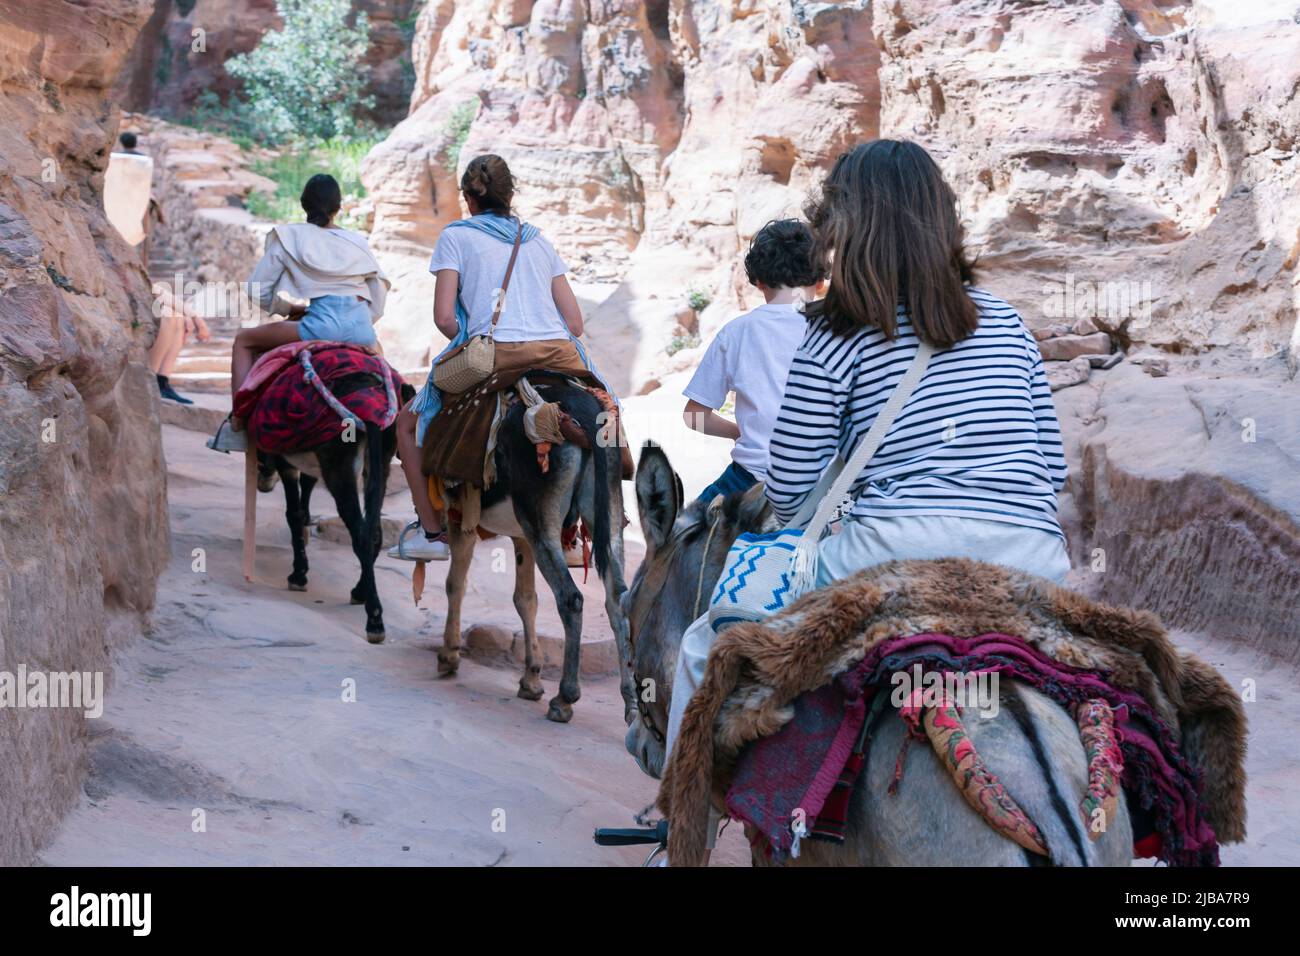 Tourist using a Bedouin donkey for transport in Petra Jordan. Descends stairs next to other tourists walking Stock Photo